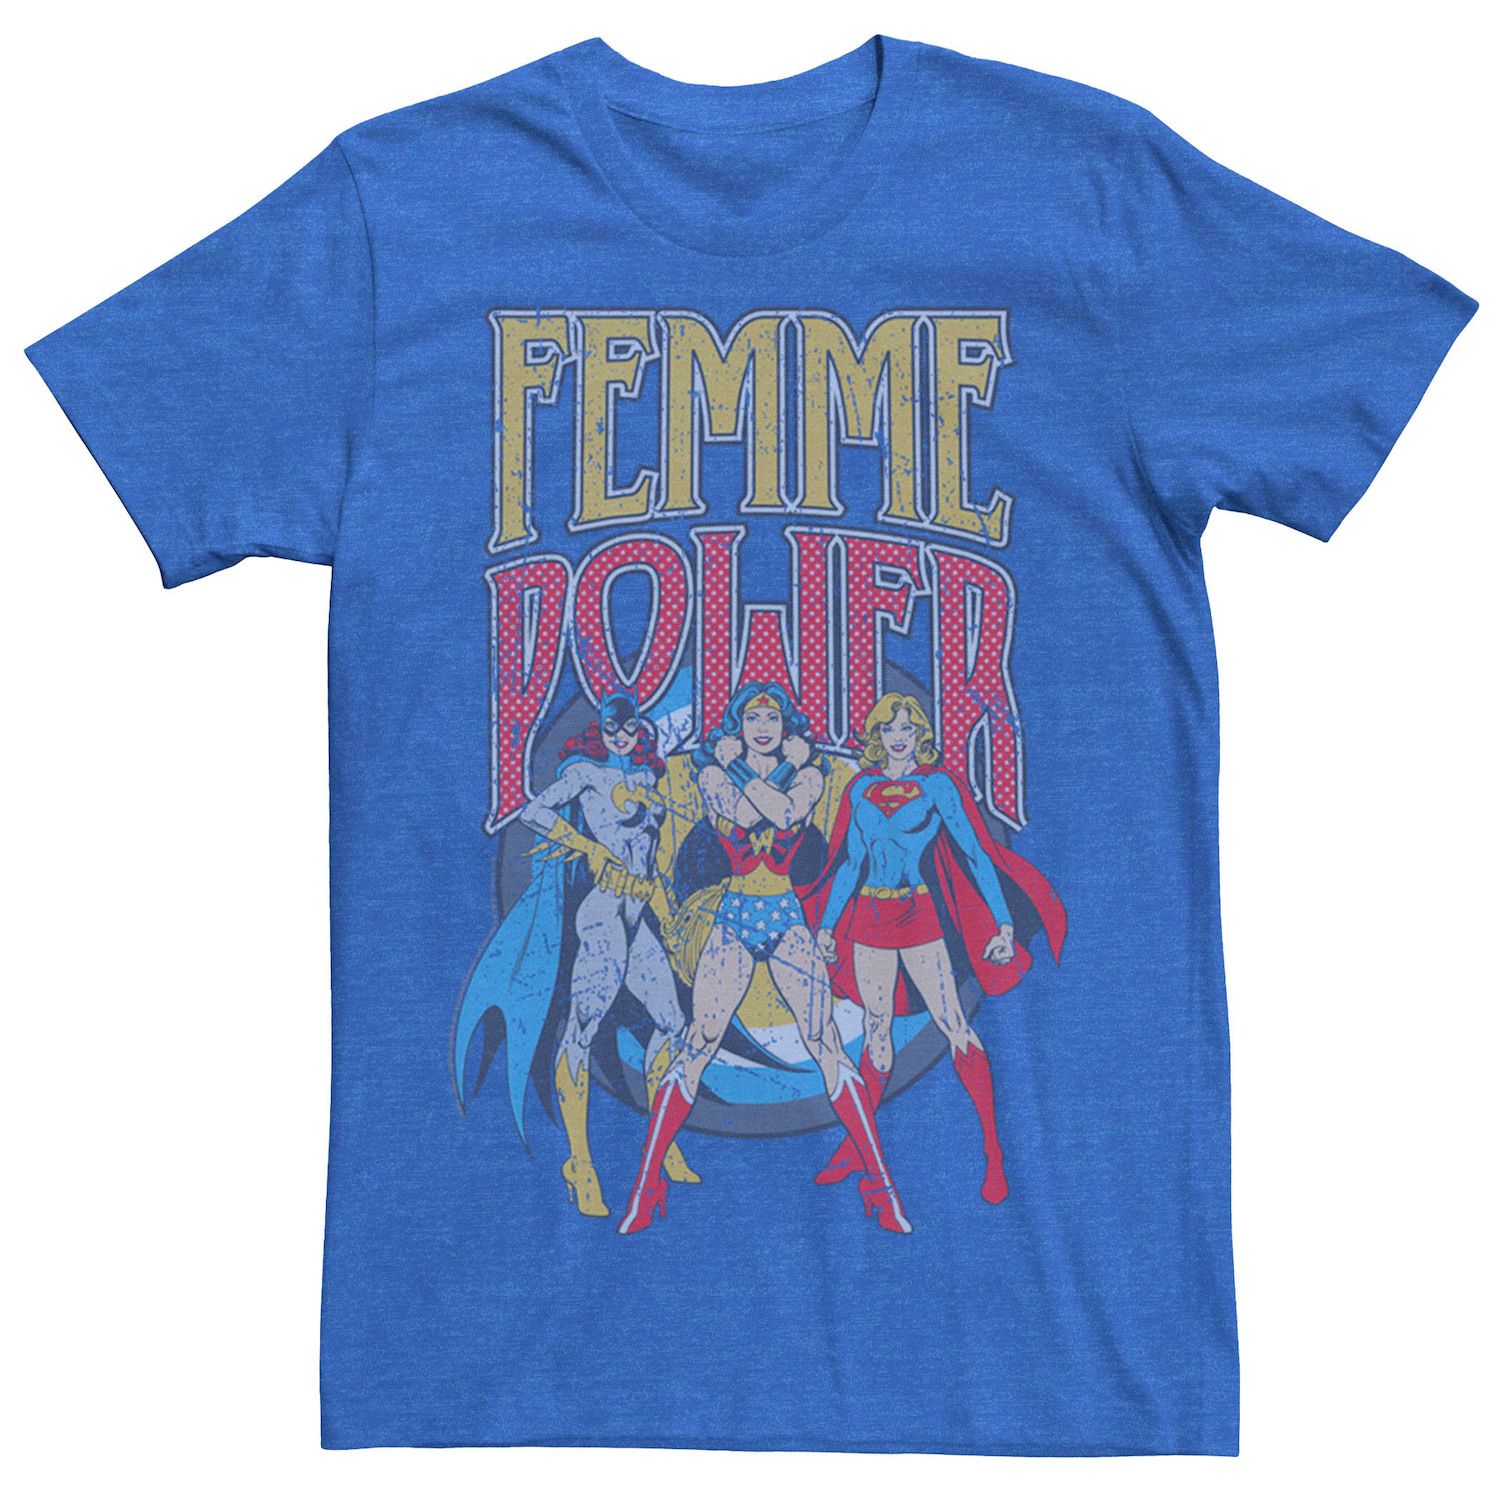 Image for Licensed Character Men's DC Comics Justice League Vintage Femme Power Tee at Kohl's.